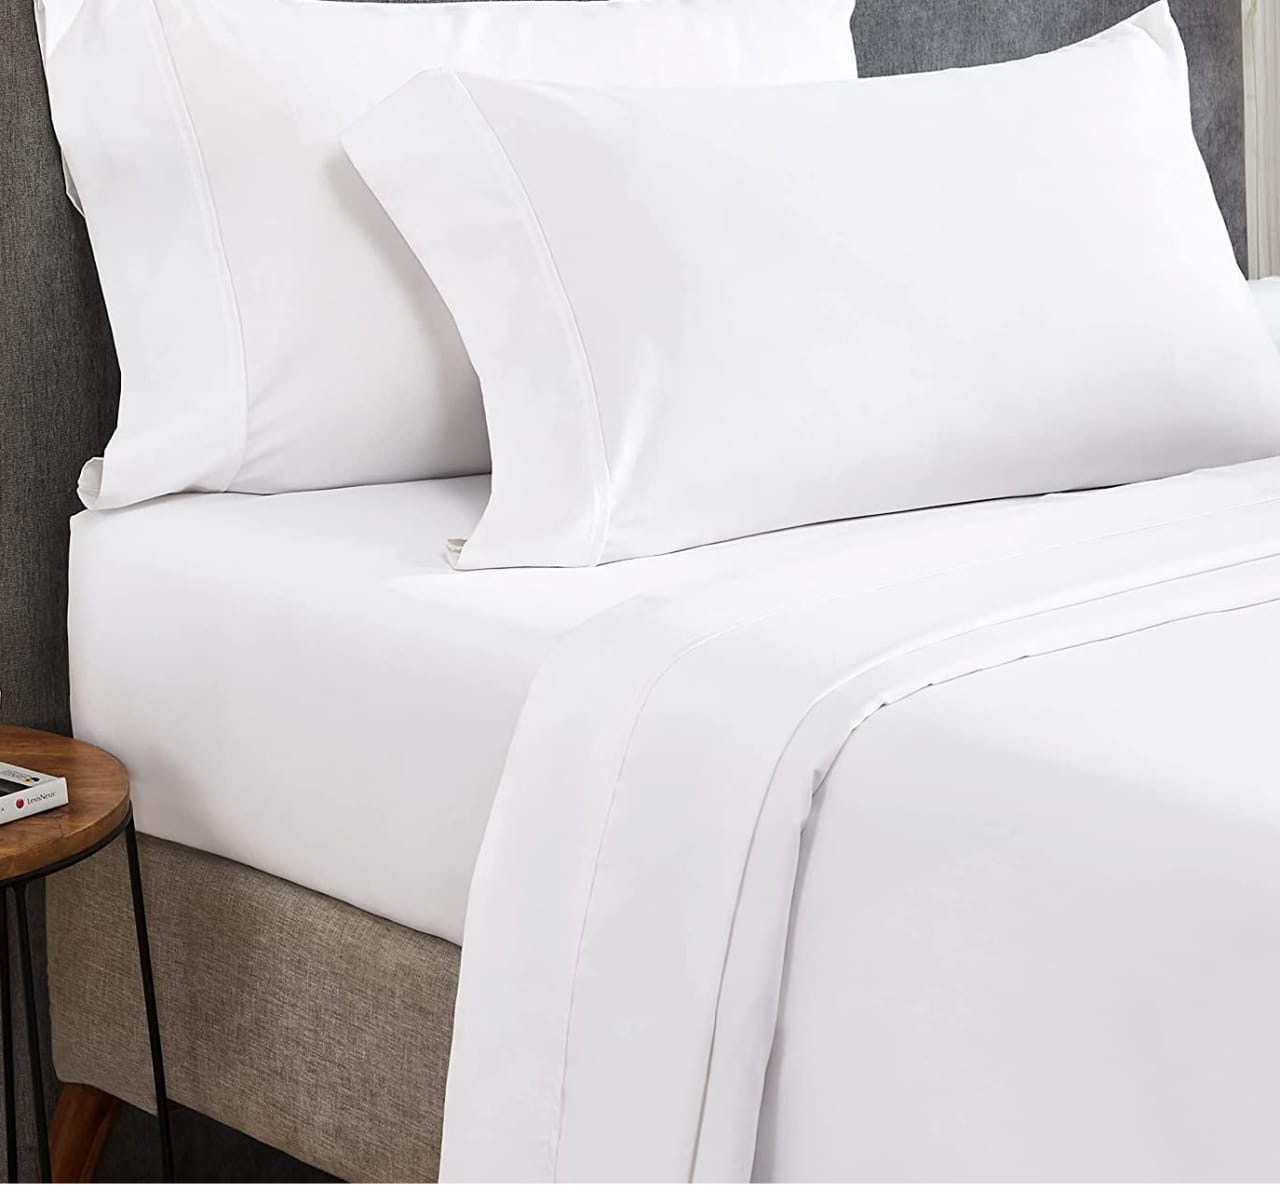 Is Egyptian Cotton the Best?, Bed Linen Myths